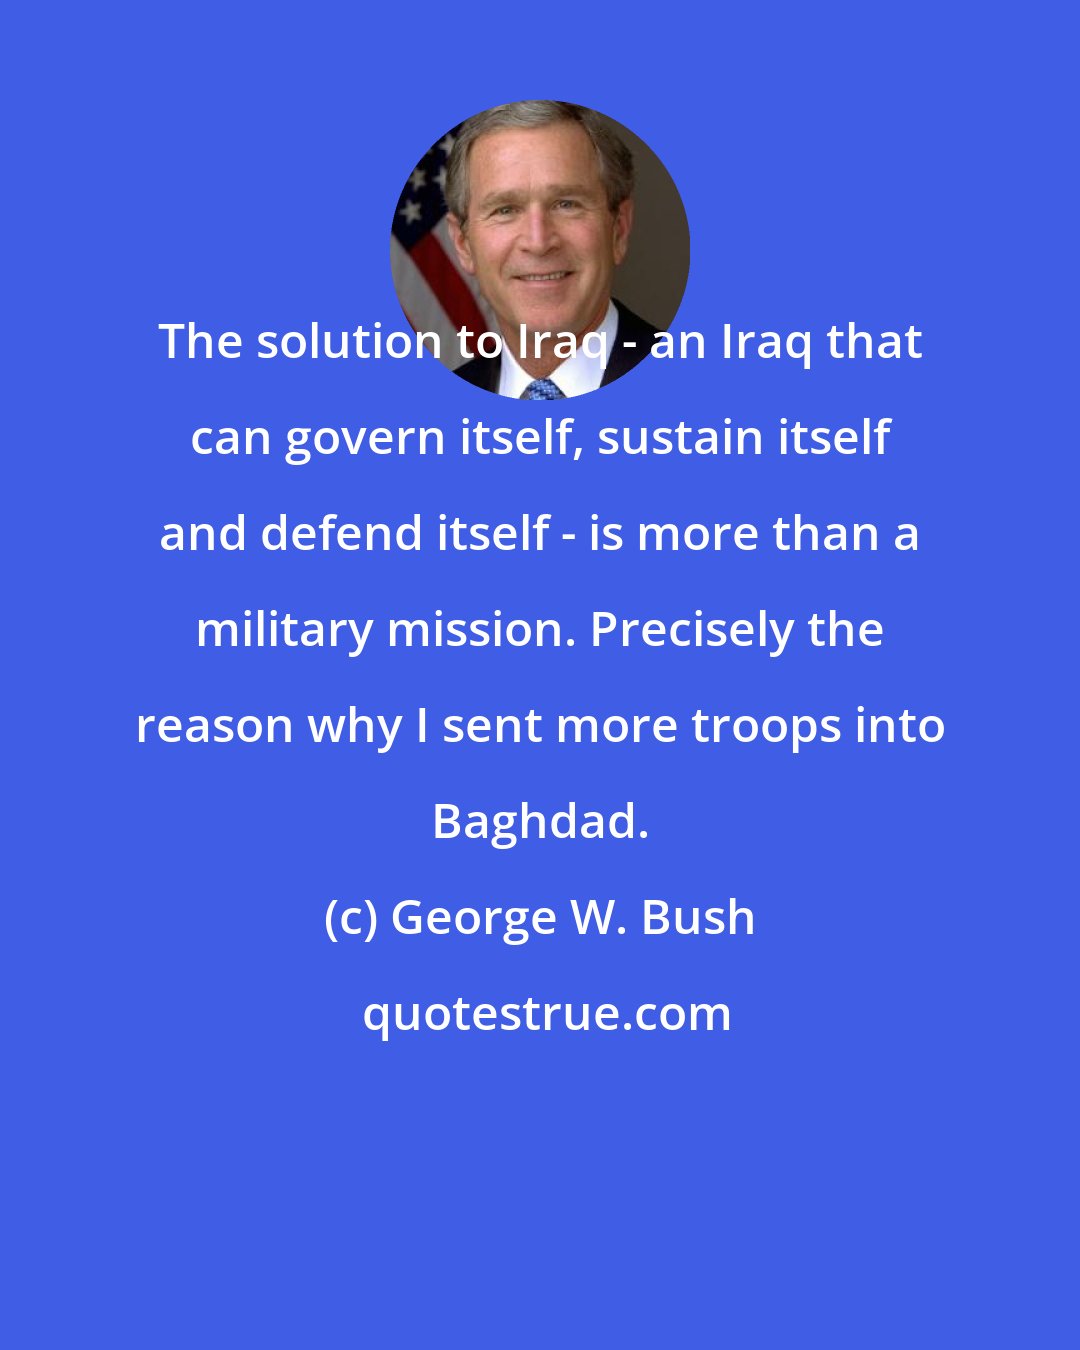 George W. Bush: The solution to Iraq - an Iraq that can govern itself, sustain itself and defend itself - is more than a military mission. Precisely the reason why I sent more troops into Baghdad.